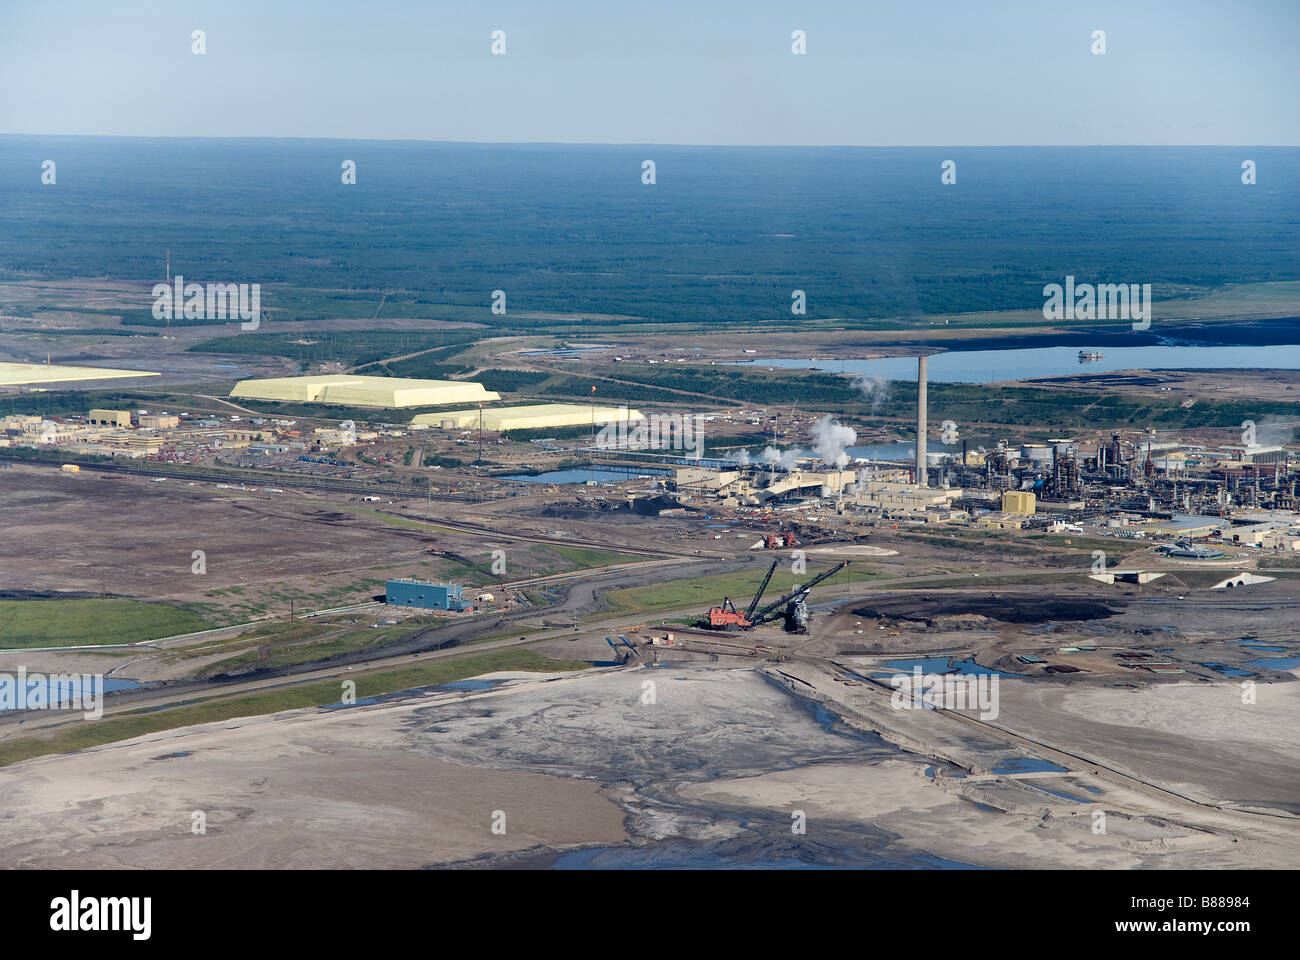 An aerial view of the Syncrude heavy oil upgrader facility in the Alberta tar sands north of Fort McMurray ,Alberta, Canada. Stock Photo